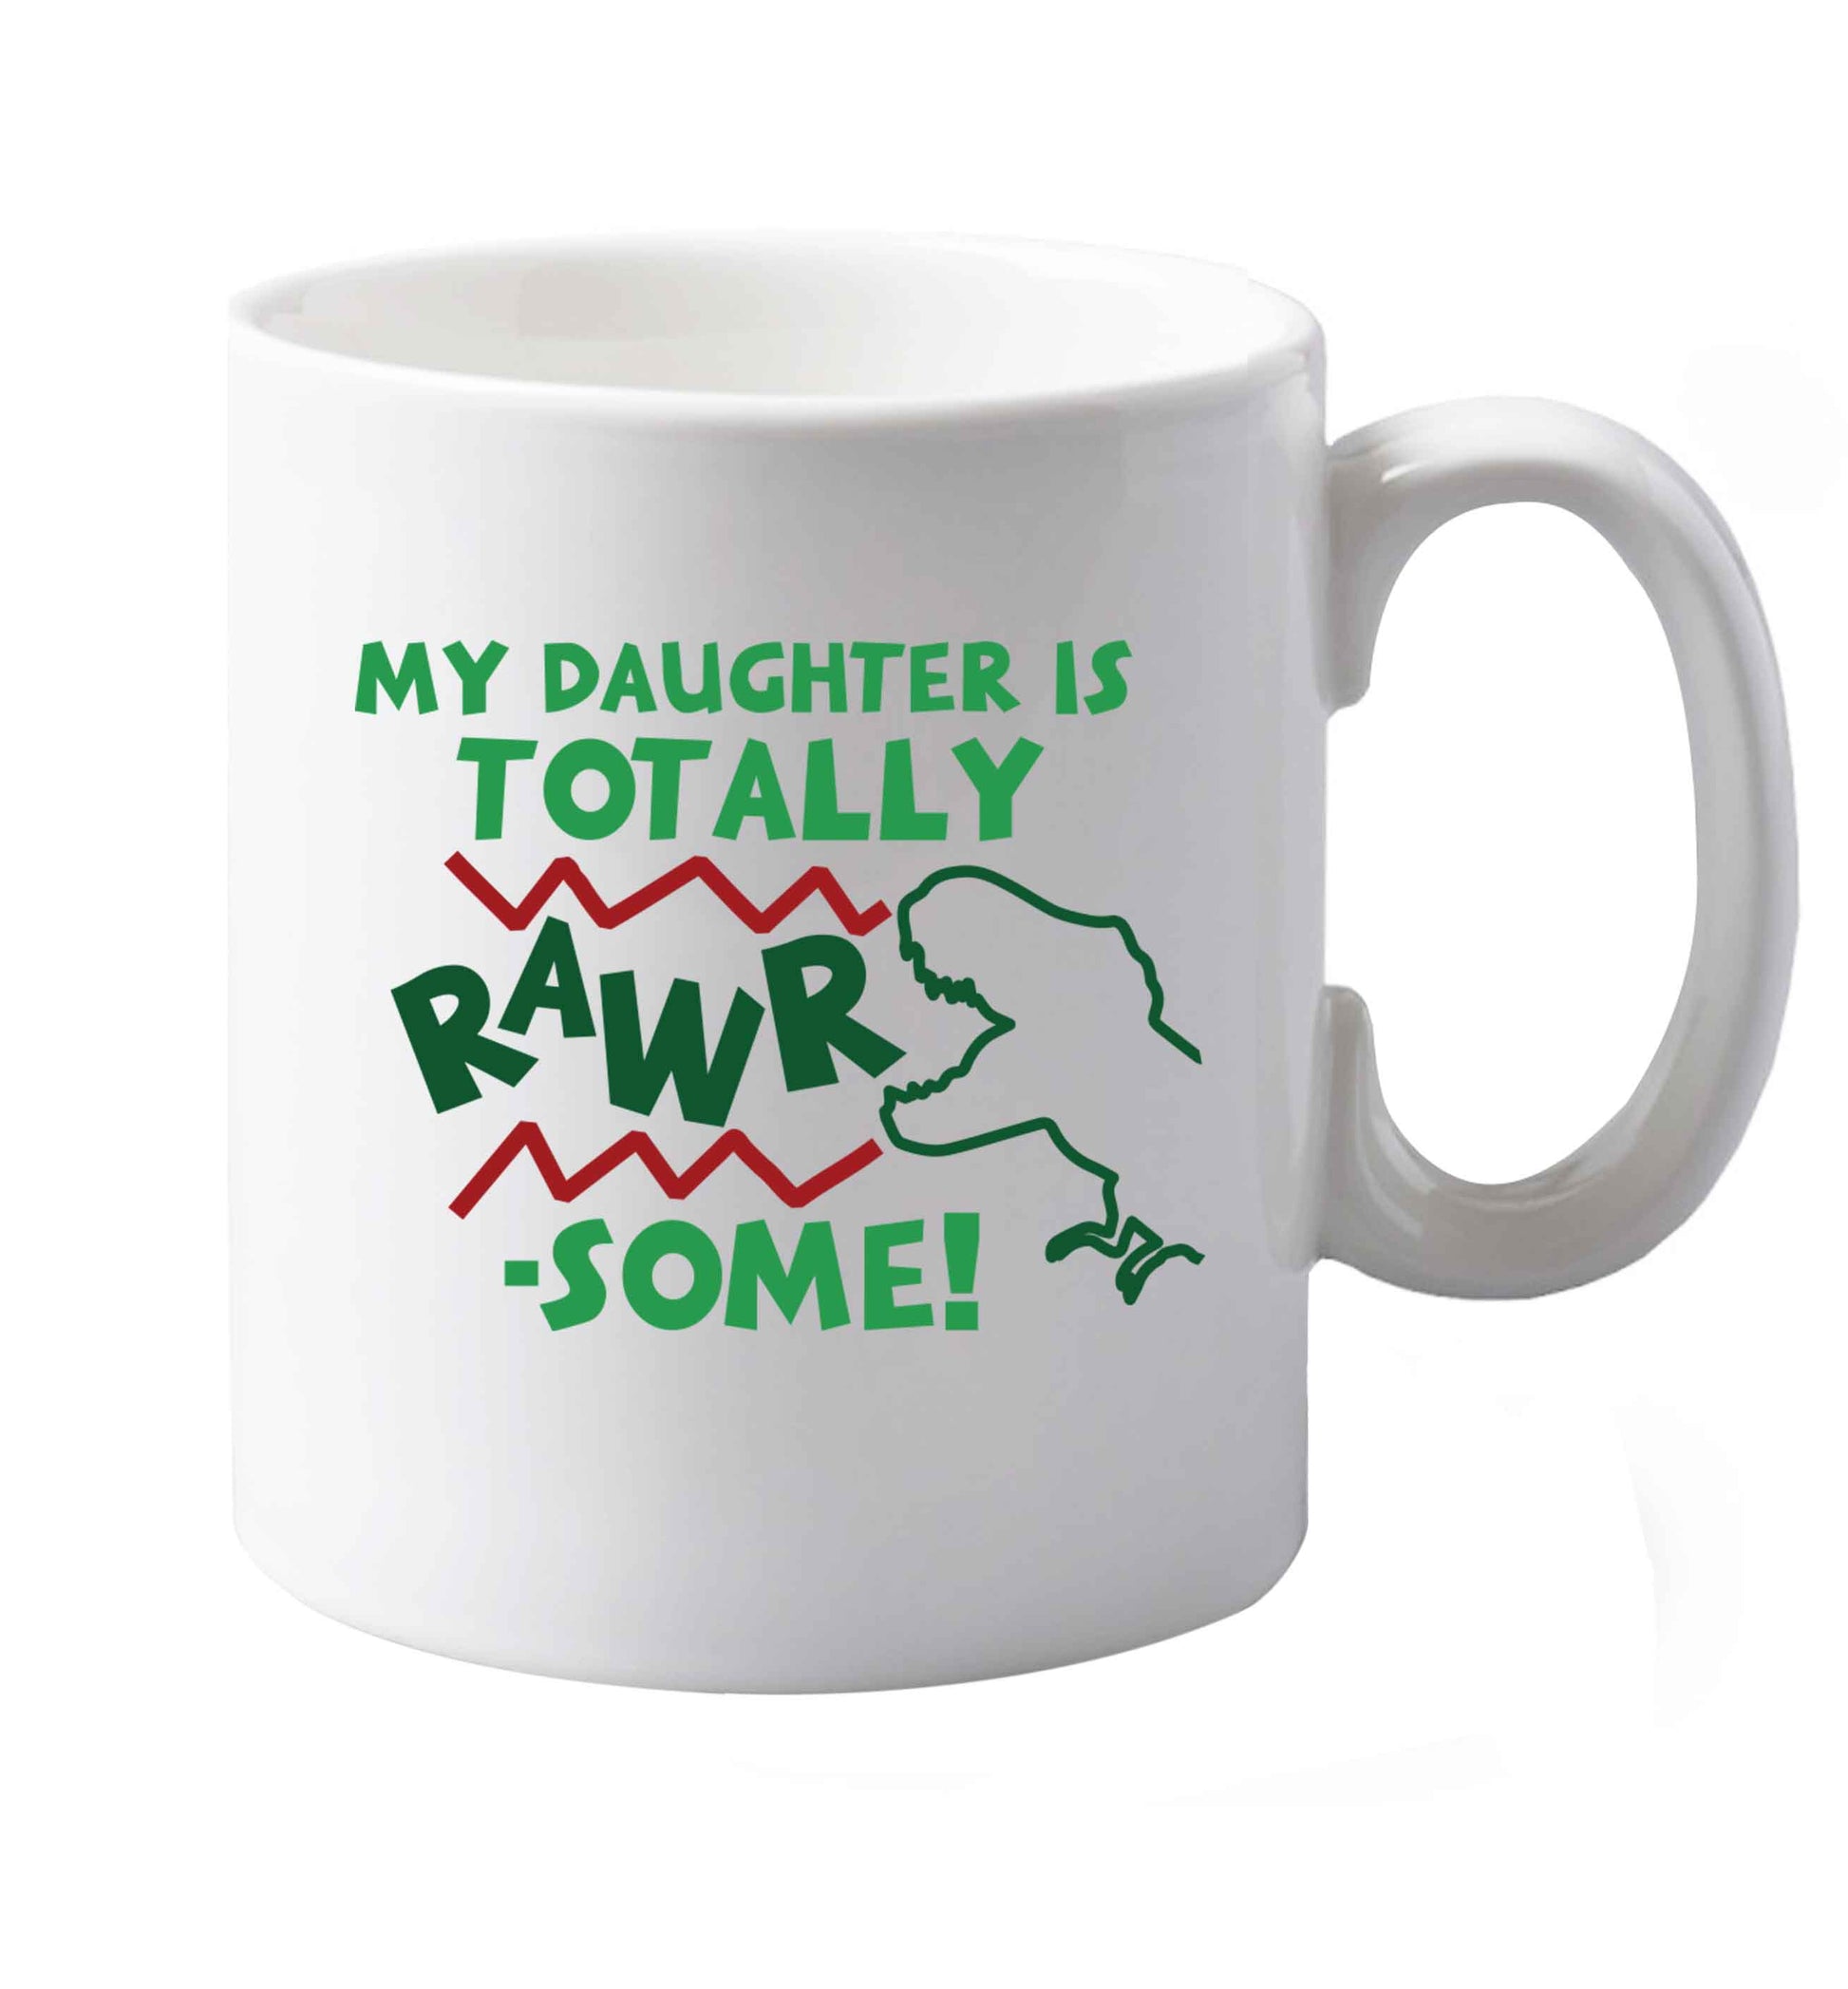 10 oz My daughter is totally rawrsome ceramic mug both sides